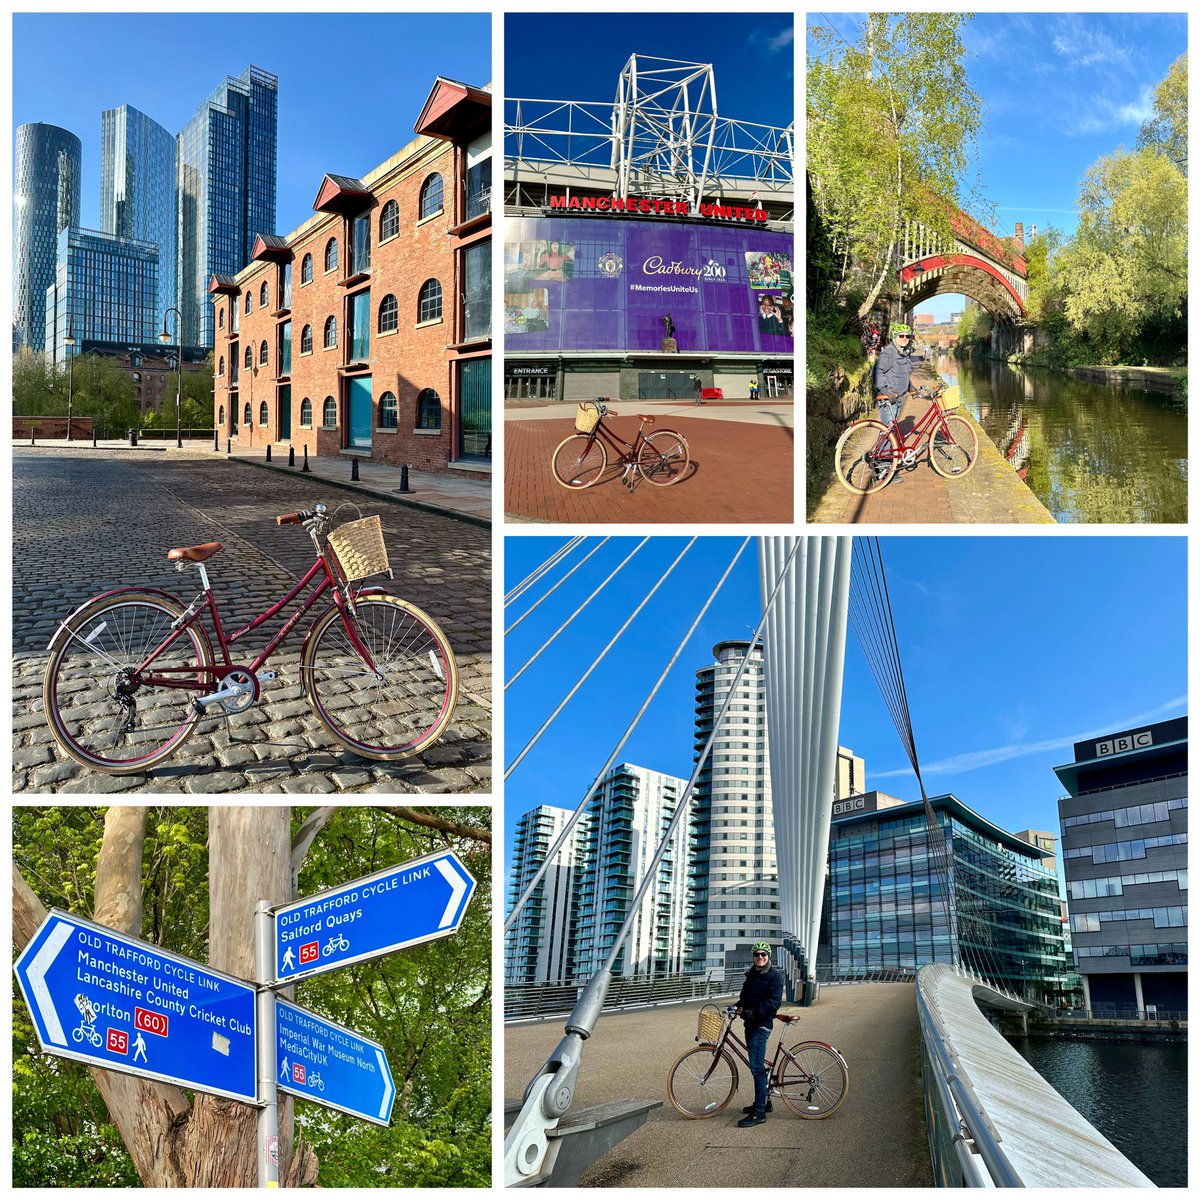 Canal, cobbles, Old Trafford and MediaCity - taking in the sights on today’s Manchester/Salford Quays ride  #Day27 #30DaysOfBiking 🚴‍♀️